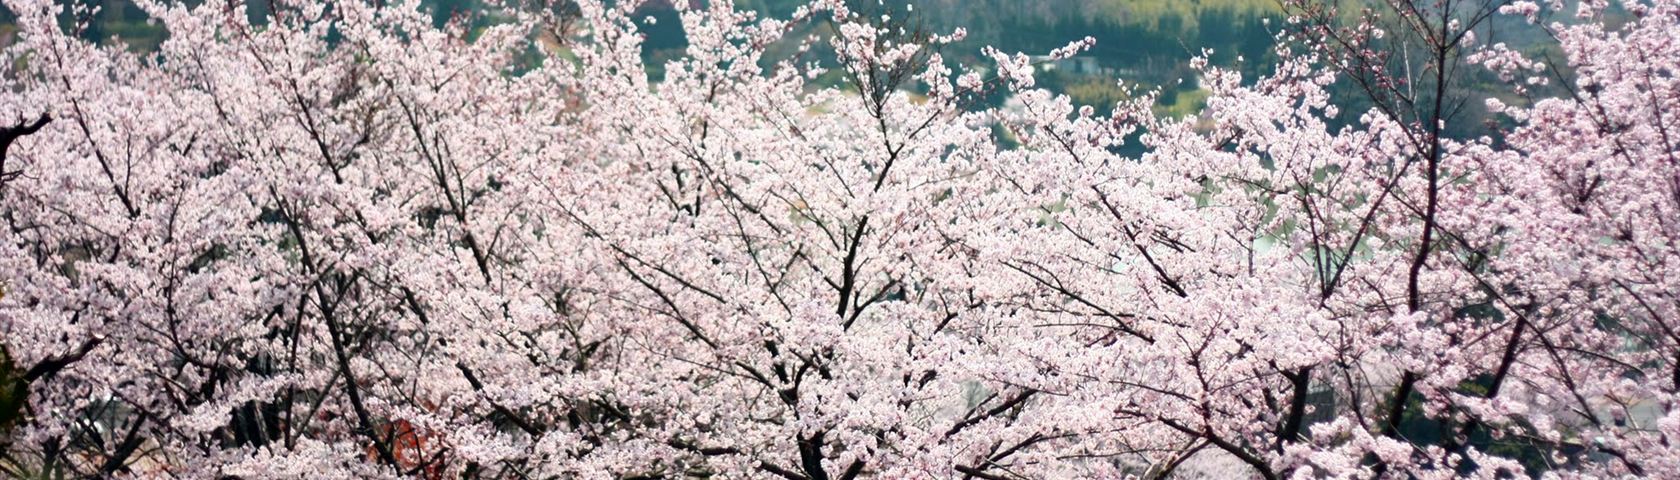 Cherry Trees in Blossom